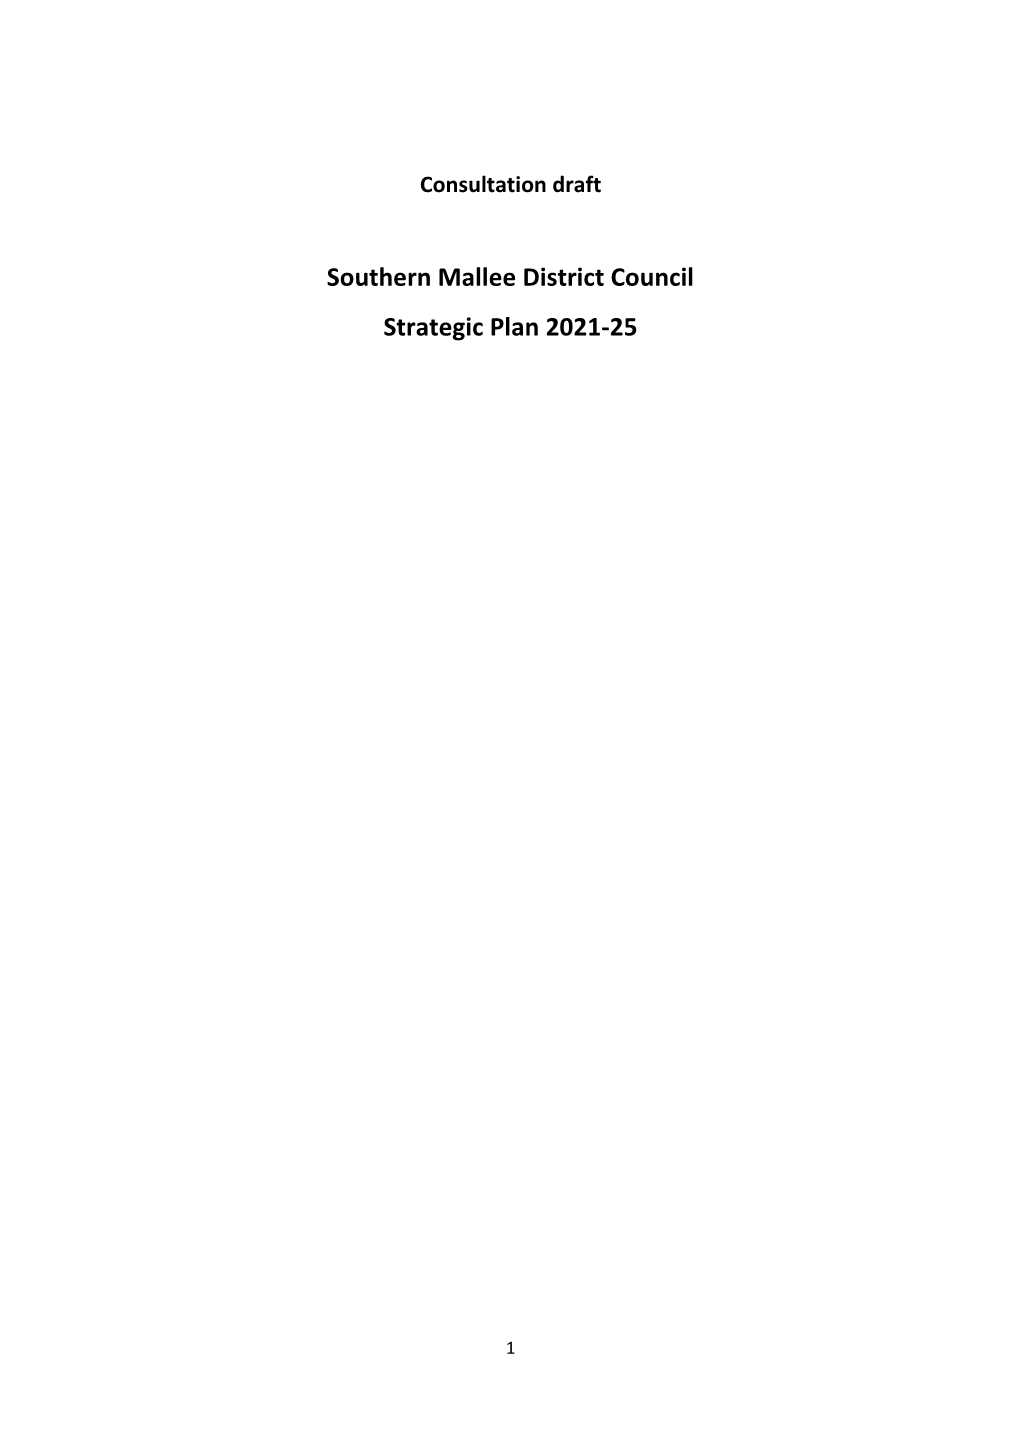 Southern Mallee District Council Strategic Plan 2021-25